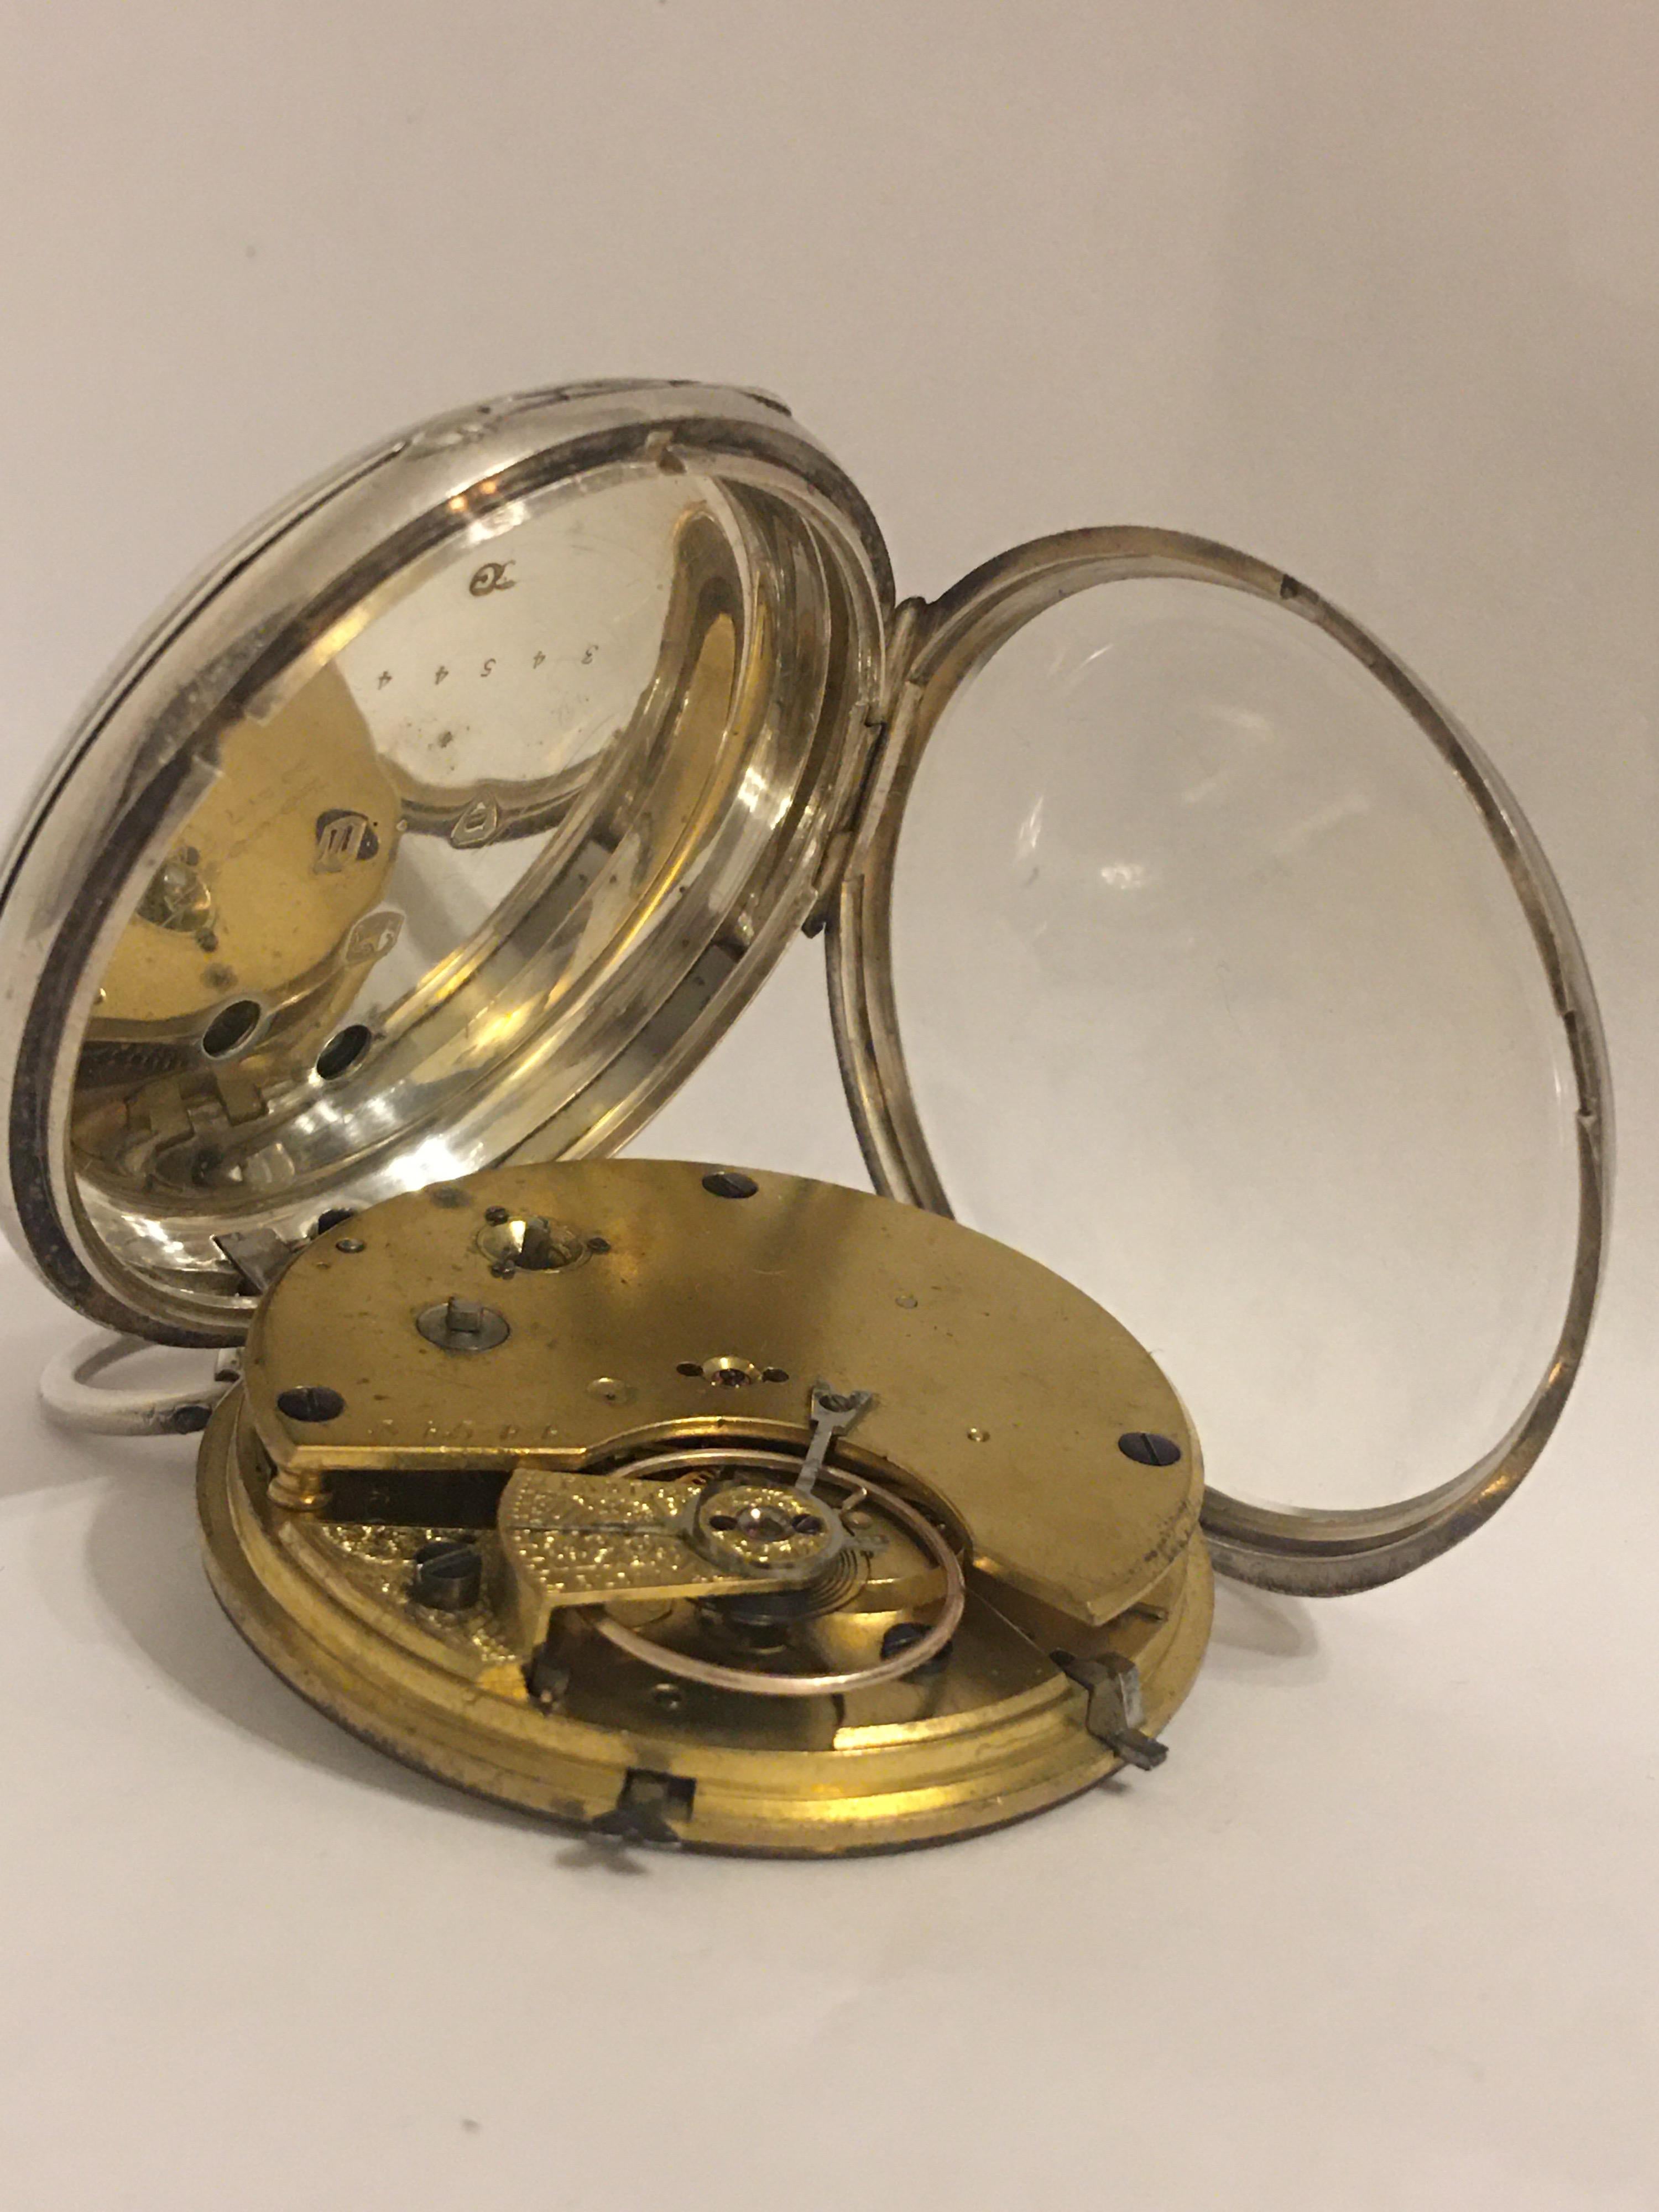 Early Silver Pocket Watch with Swift Second For Sale 6